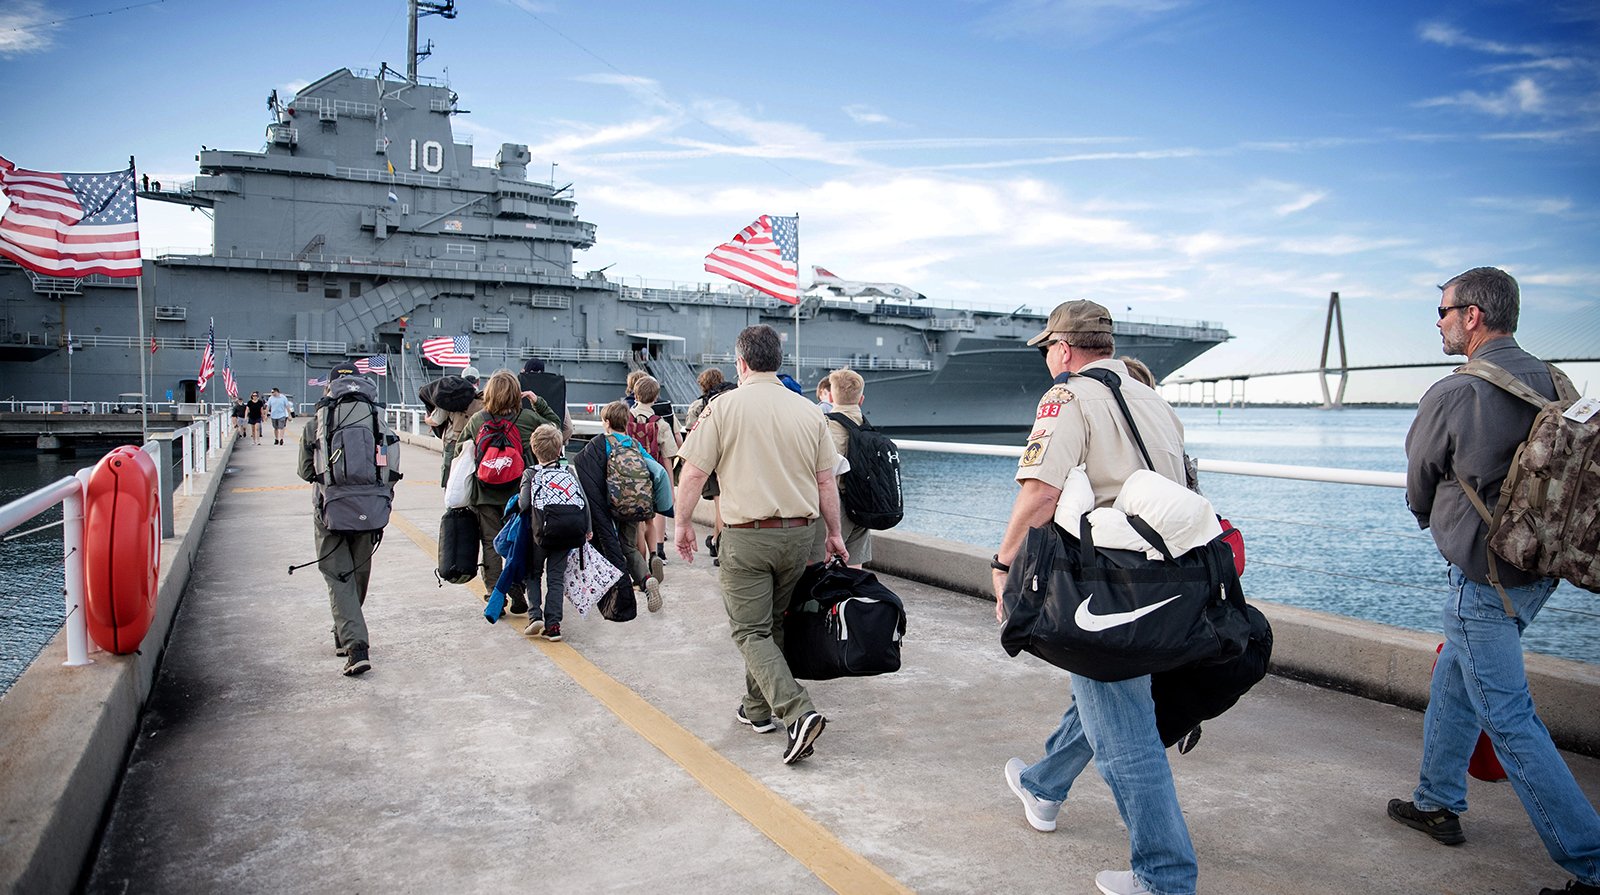 Adults and children walk across the pier leading to the USS Yorktown aircraft carrier to participate in the Operation Overnight camping program.